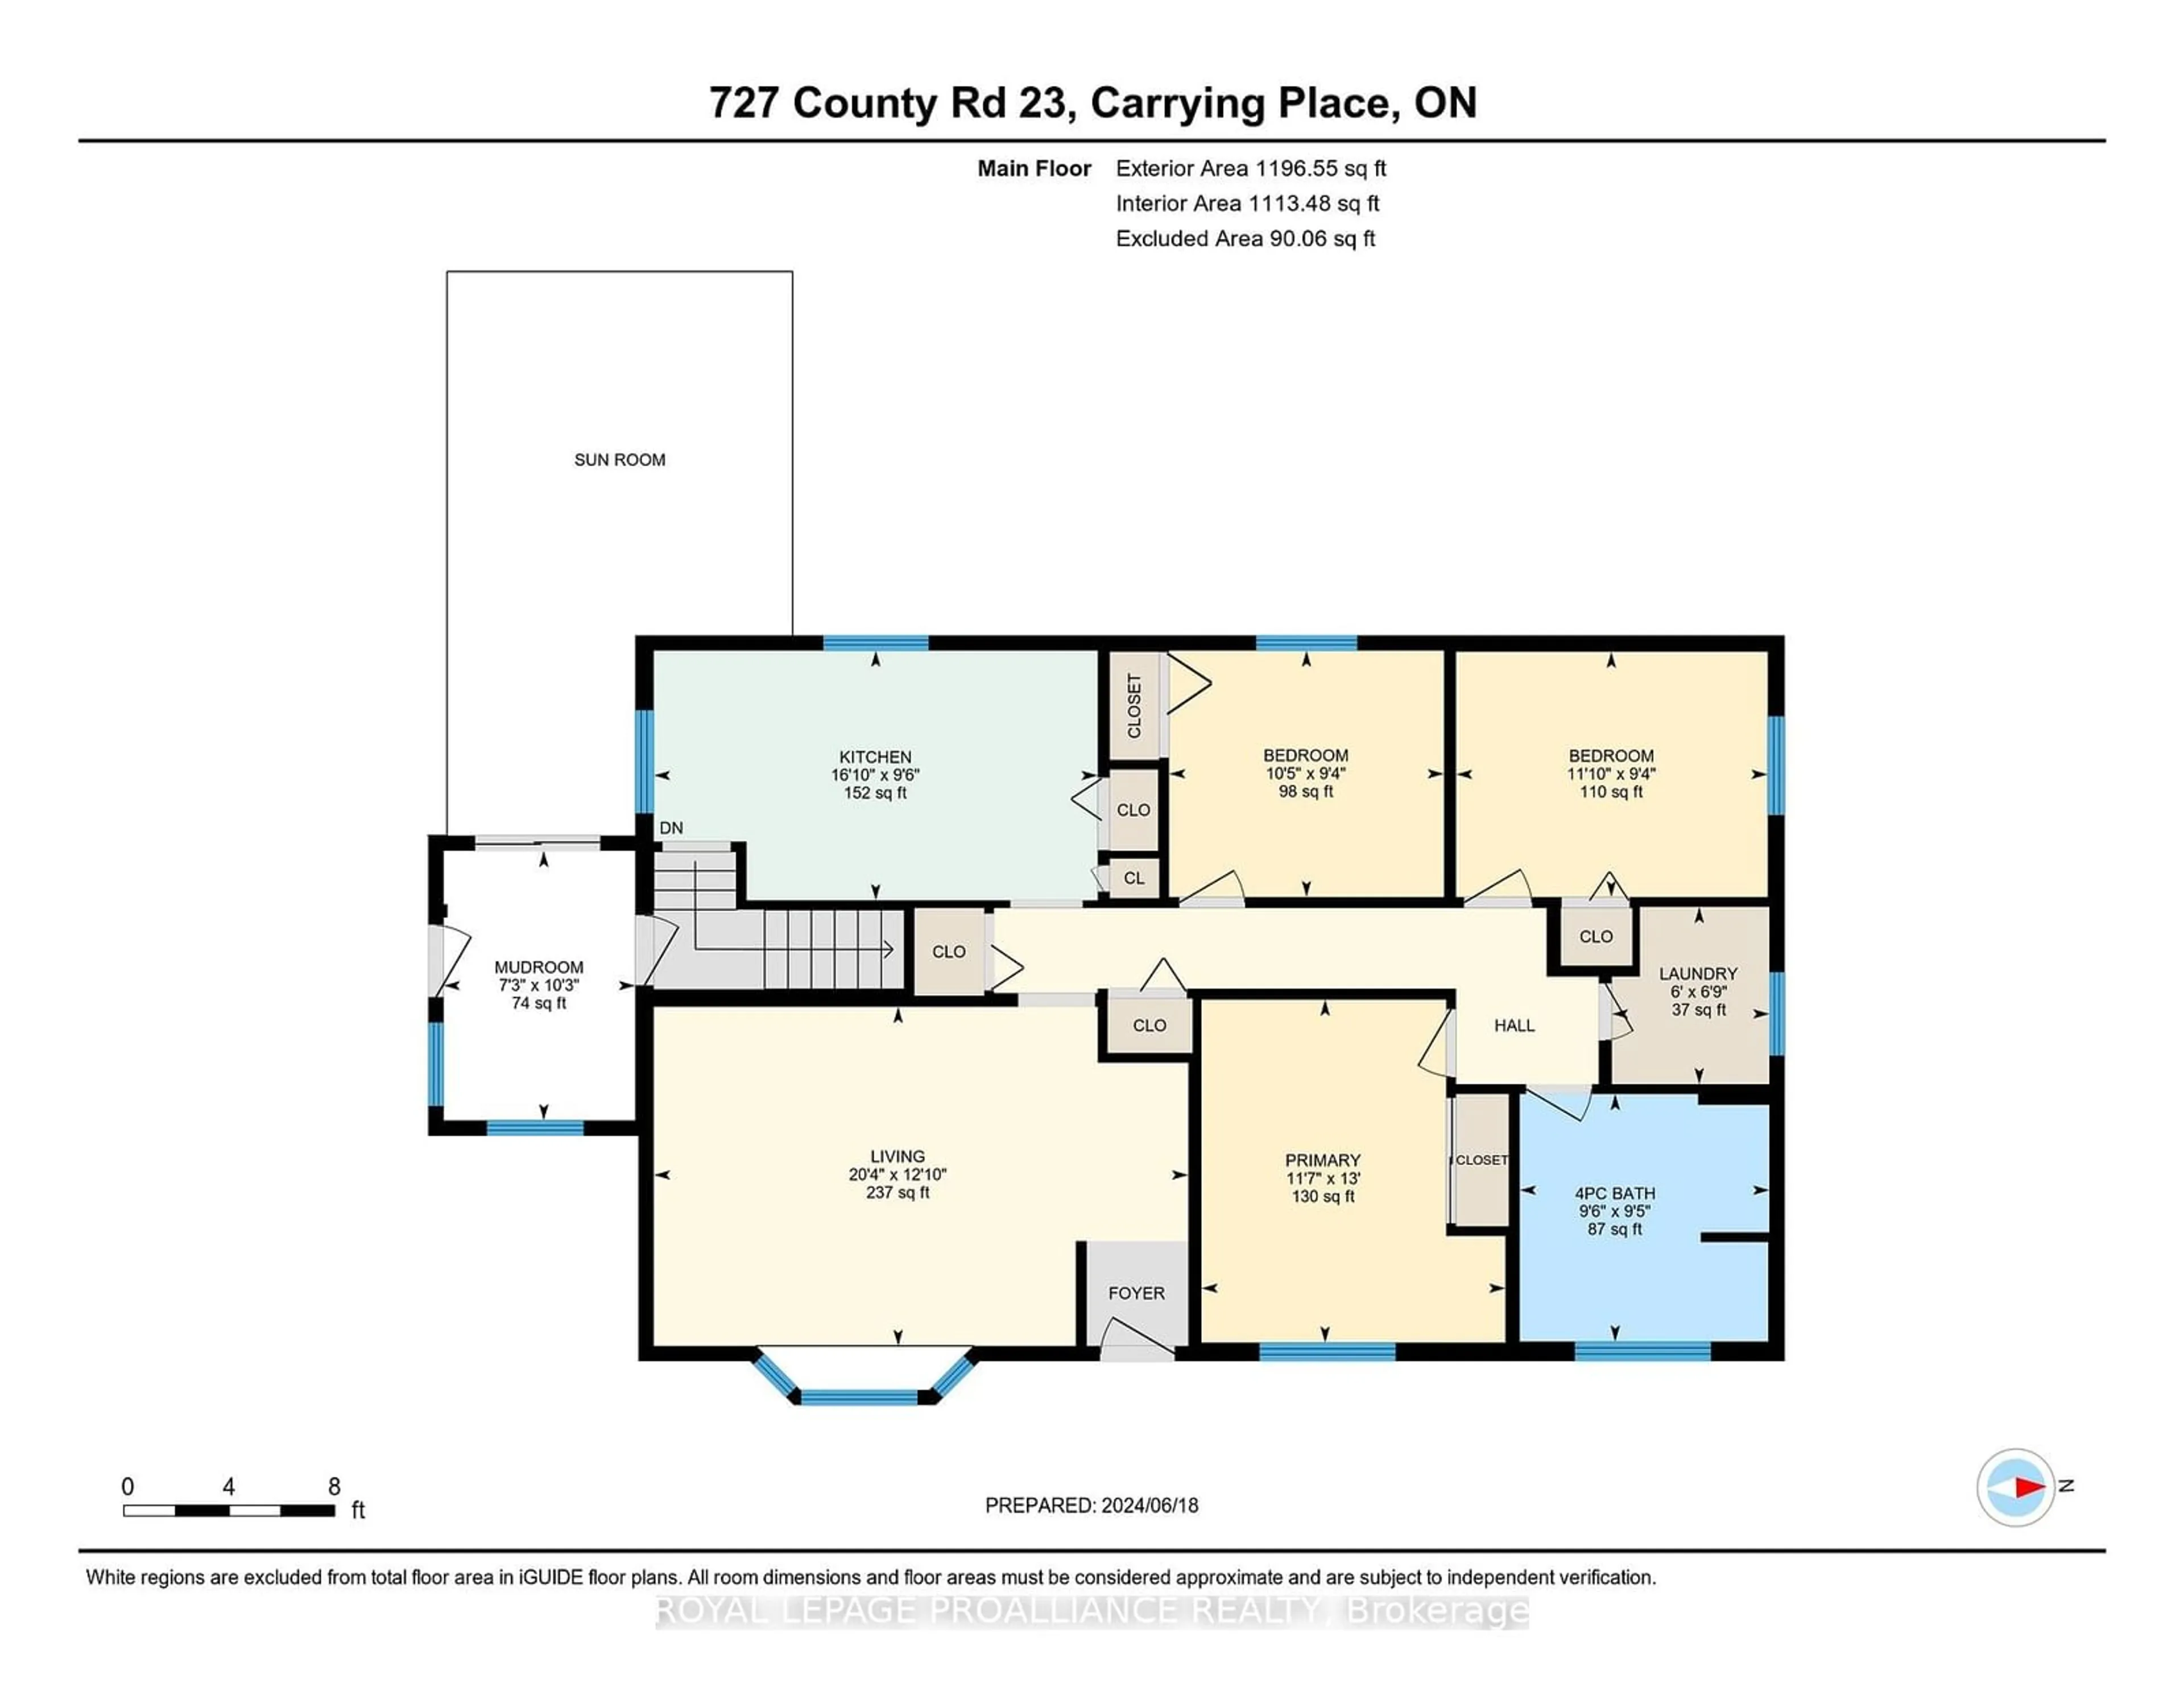 Floor plan for 727 County Rd 23, Prince Edward County Ontario K0K 1L0